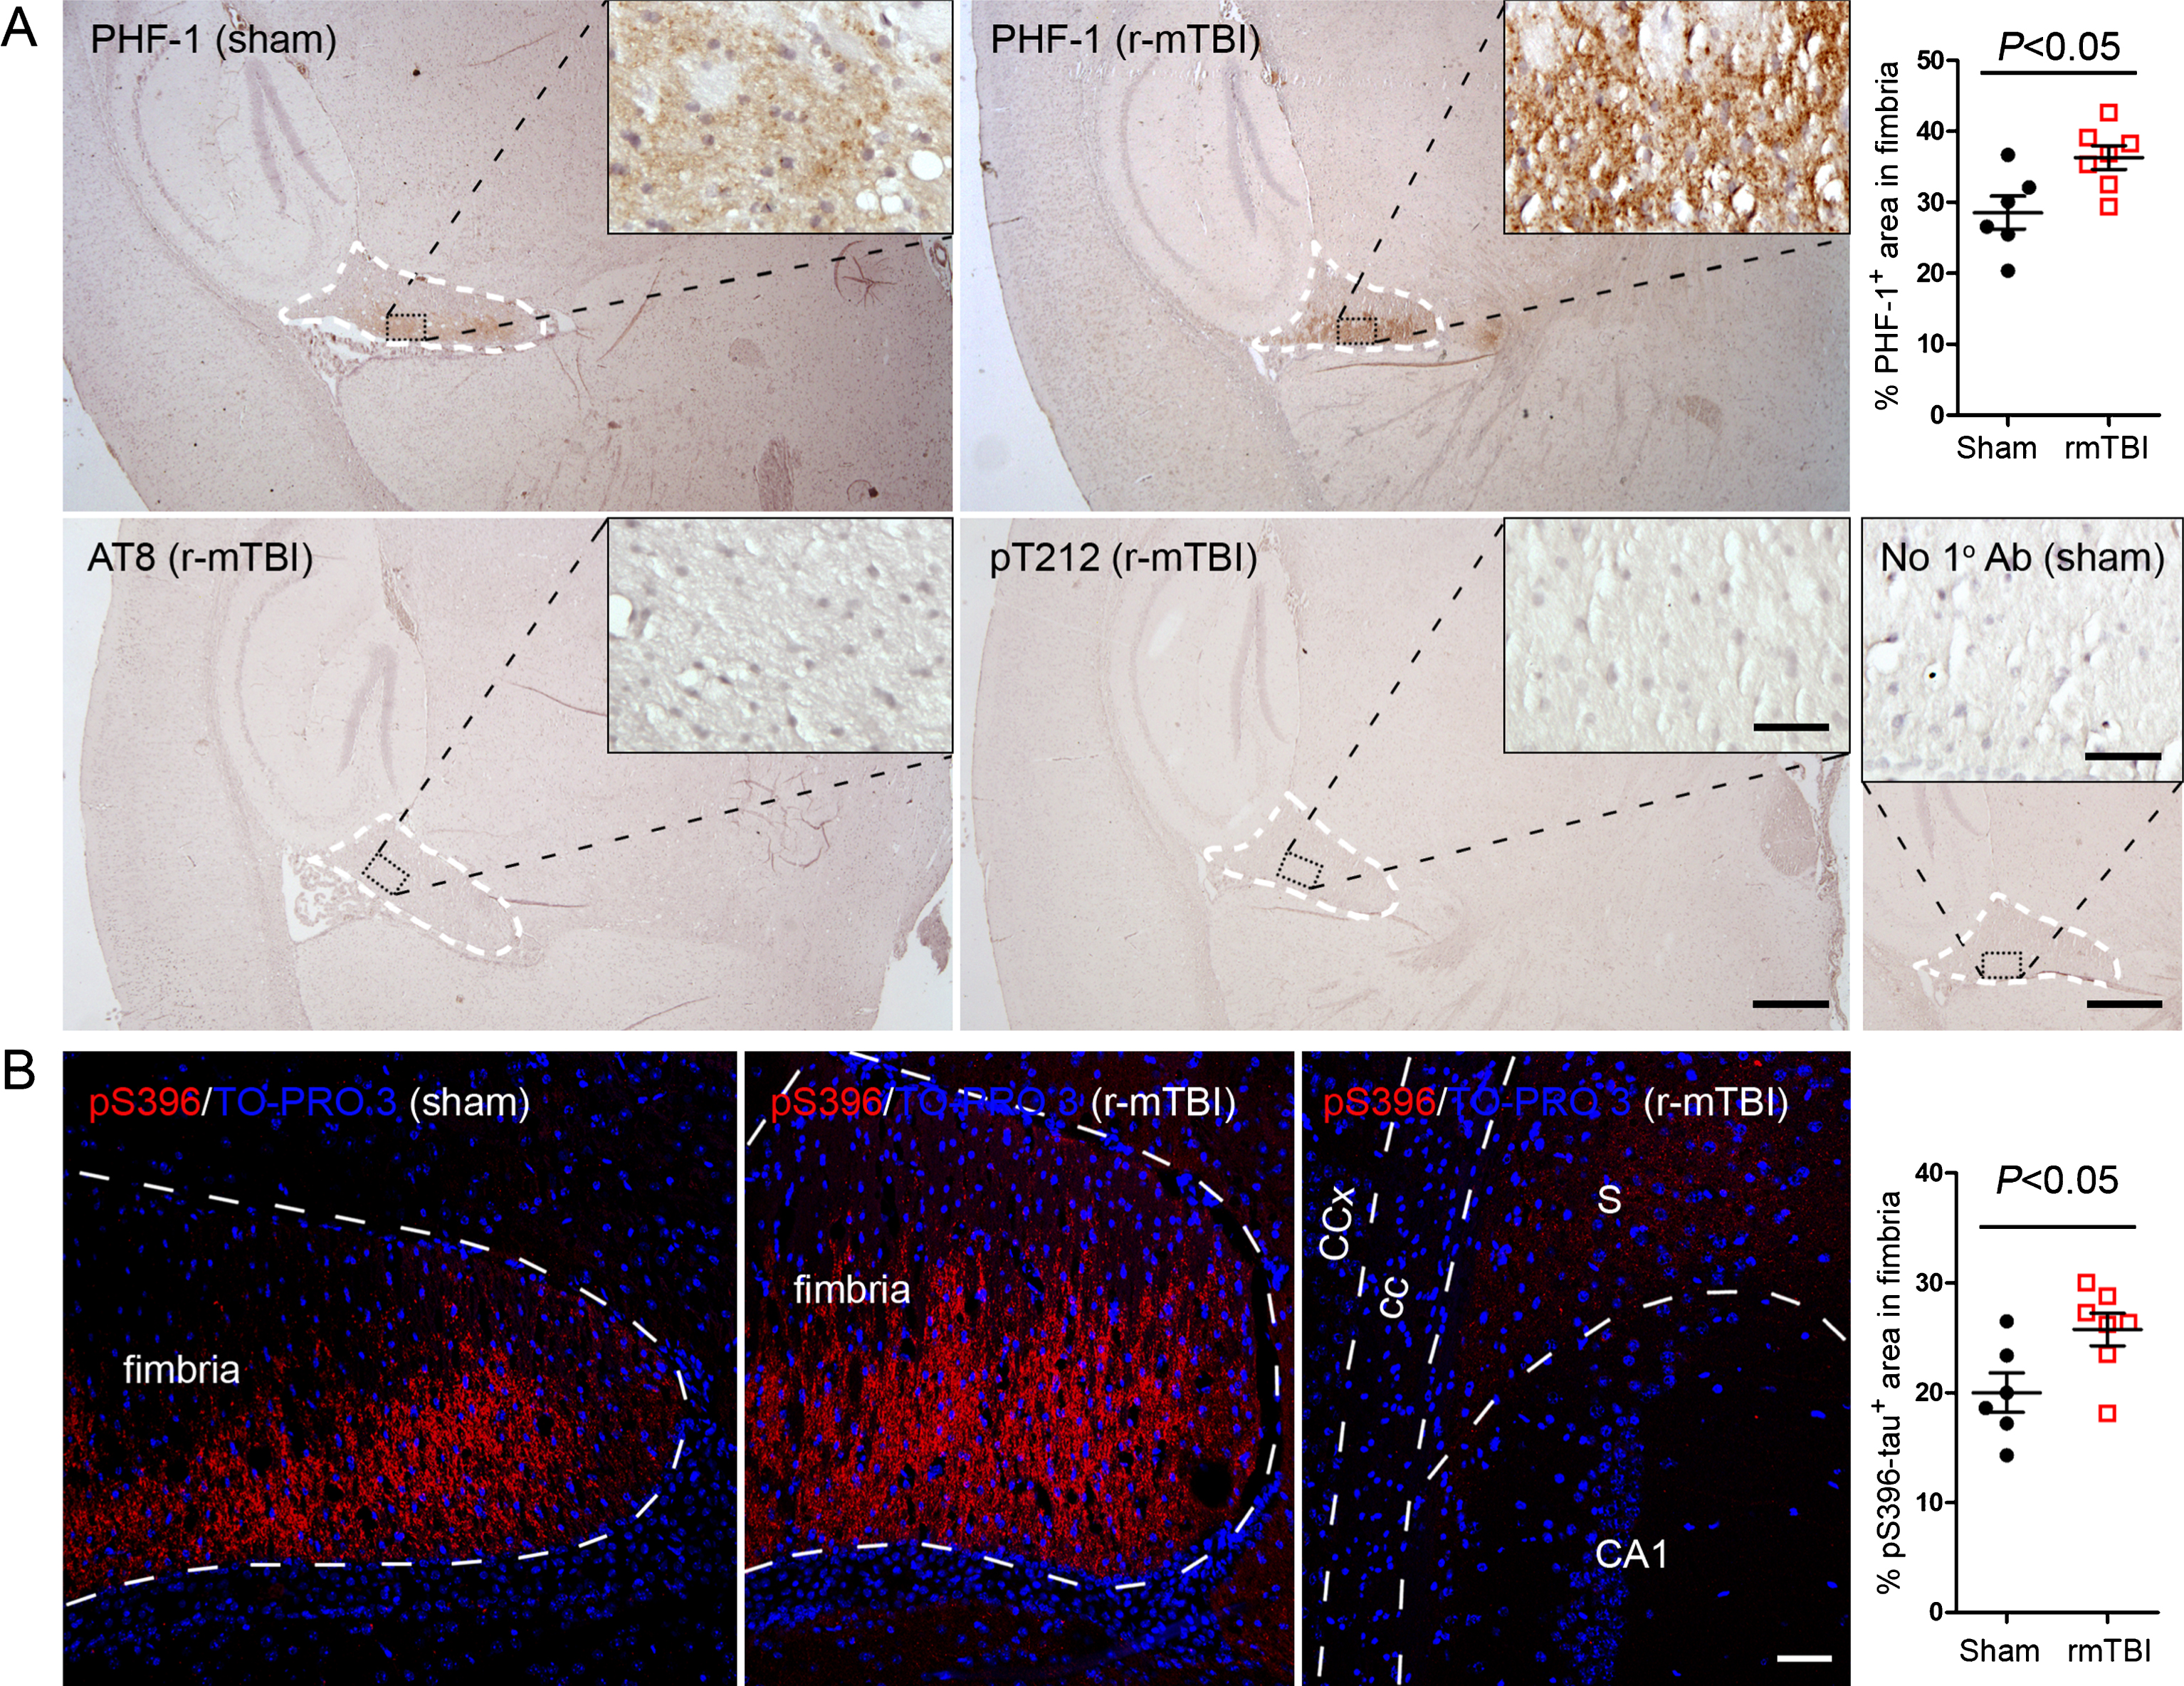 Tau is hyperphosphorylated in fimbria of the hippocampus in 3xTg-AD mice after r-mTBI. A) Representative images showing immunohistochemical staining of sagittal brain sections with antibodies PHF-1, AT8 (pSer202/pThr205) or anti-pThr212-tau. Fimbria showed easily visible PHF-1 immunoreactivity, and quantification revealed significantly more immunoreactivity in r-mTBI group than sham control group. No staining was detected by AT8 or anti-pThr212-tau. No primary antibody control for PHF-1 staining exhibited no staining. B) Immunofluorescence staining with anti-pSer396-tau. Immunoreactivity was mostly seen in fimbria, though subiculum also showed sparse staining. In addition, quantification which was performed by using images taken with a 20× objective lens showed more immunoreactivity in fimbria in r-mTBI group than in sham controls. Data are expressed as scattered dot plots with mean±SEM (n = 6-7 mice/group) and analyzed with unpaired Student t test. Scale bar = 500μm (A), 50μm (insert and B).